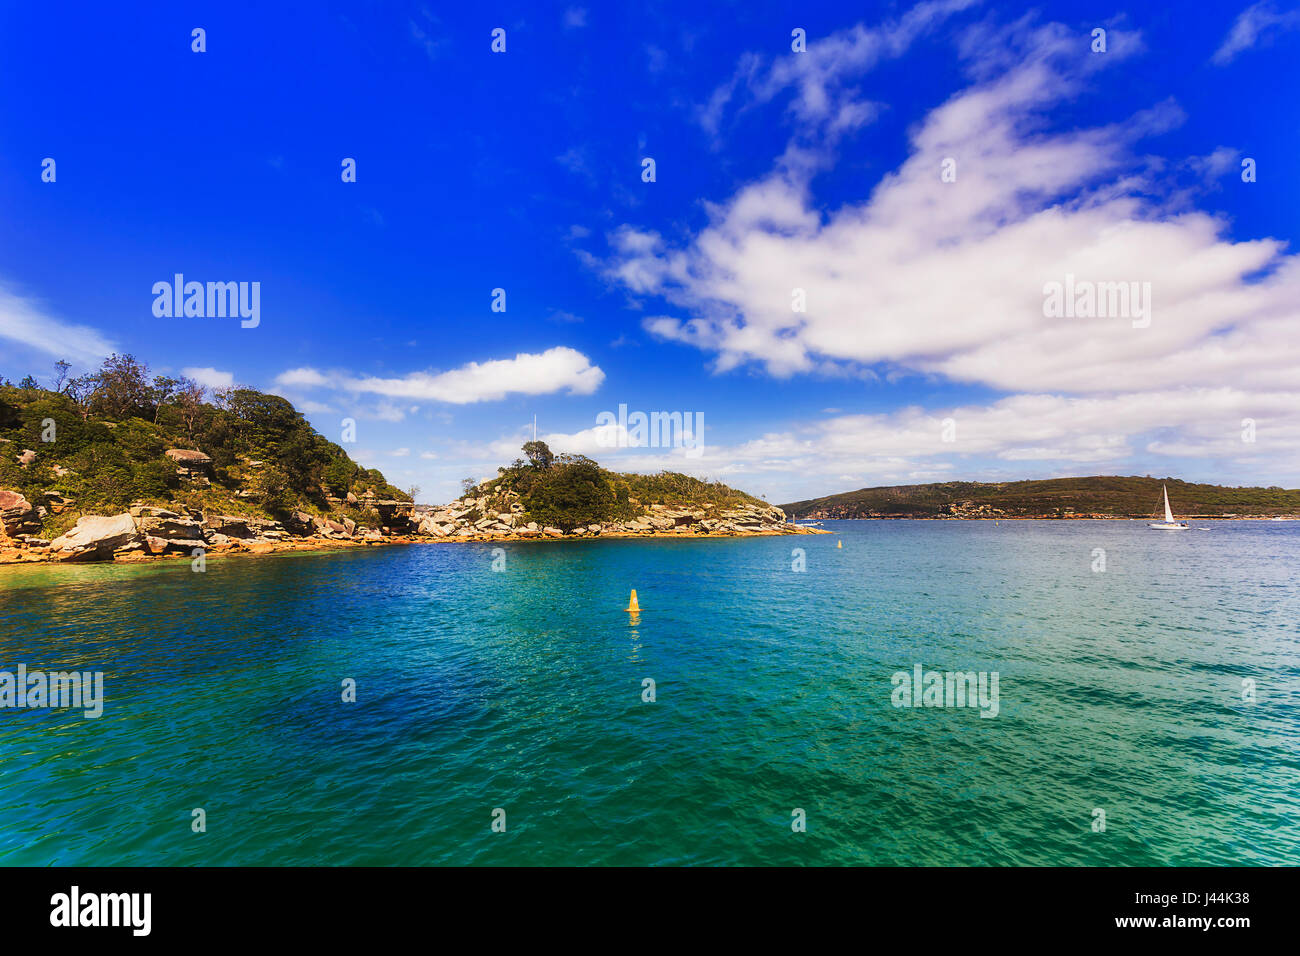 Tropical climate and sunny summer weather at inner bay of Sydney harbour around historic heritage Quarantine station. Stock Photo